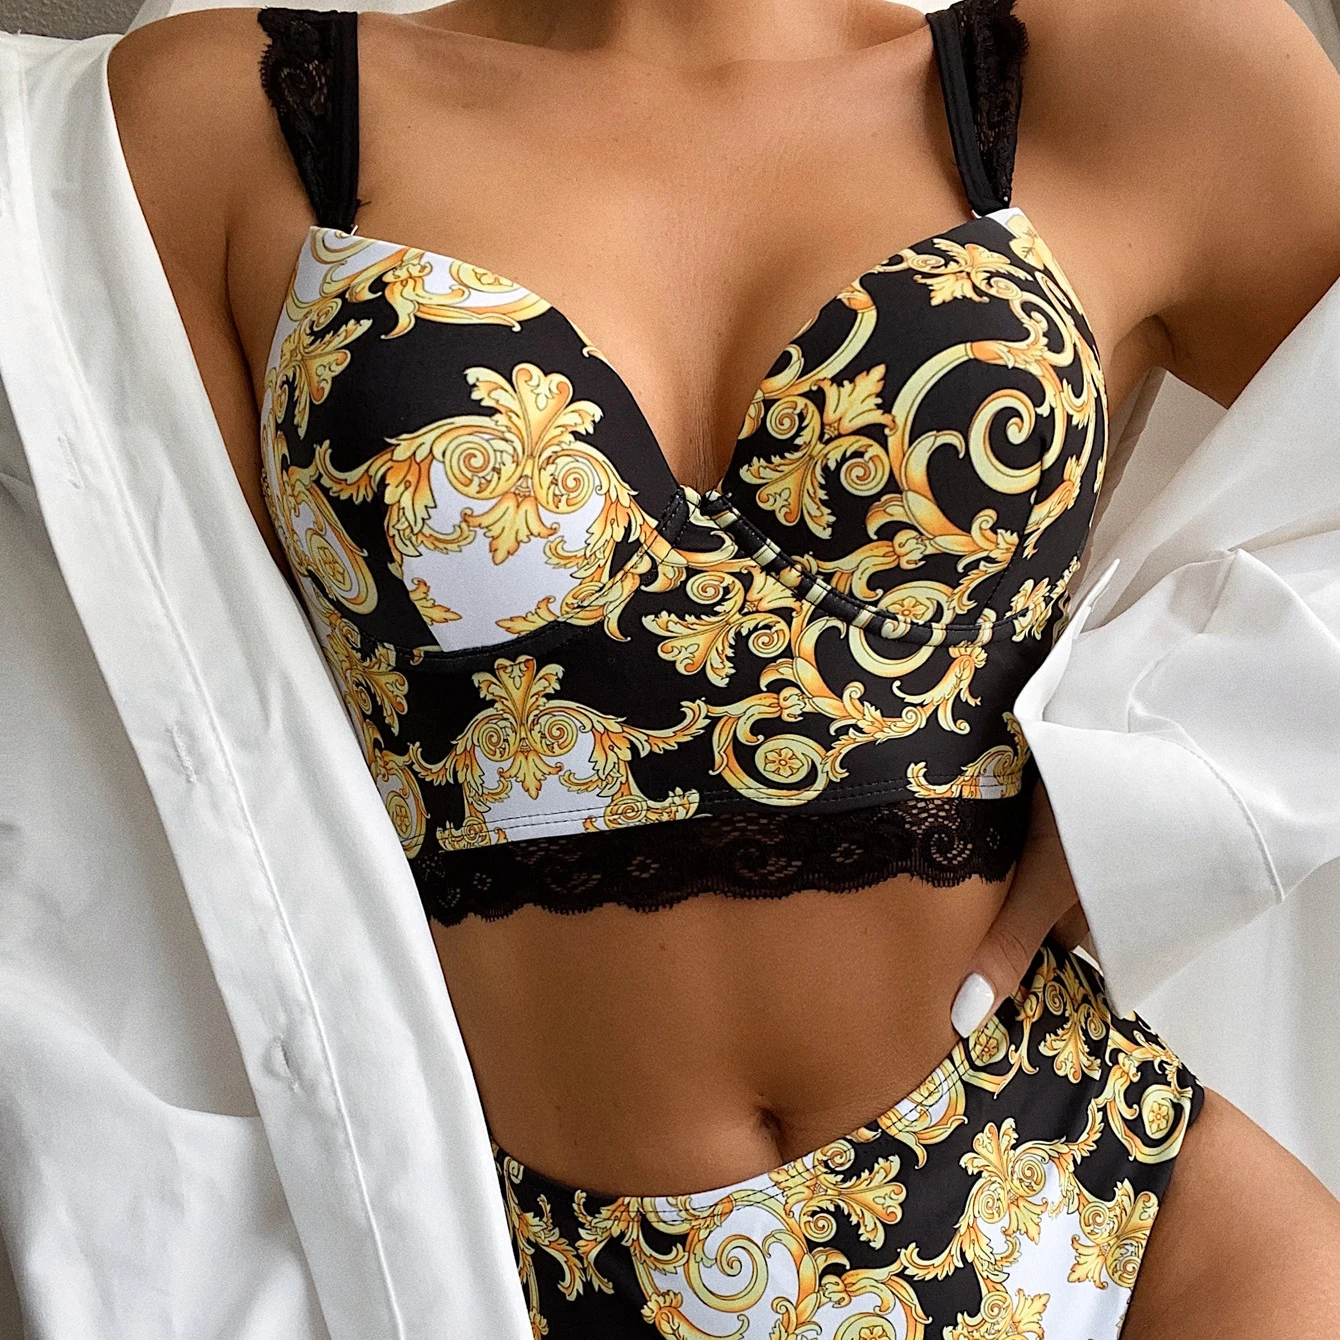 

2022 Bodysuit Sling Sleeveless Molded Cups Bikini Two Pieces Deep V Backless Yellow Floral Sexy Lace Bikinis Swimsuit